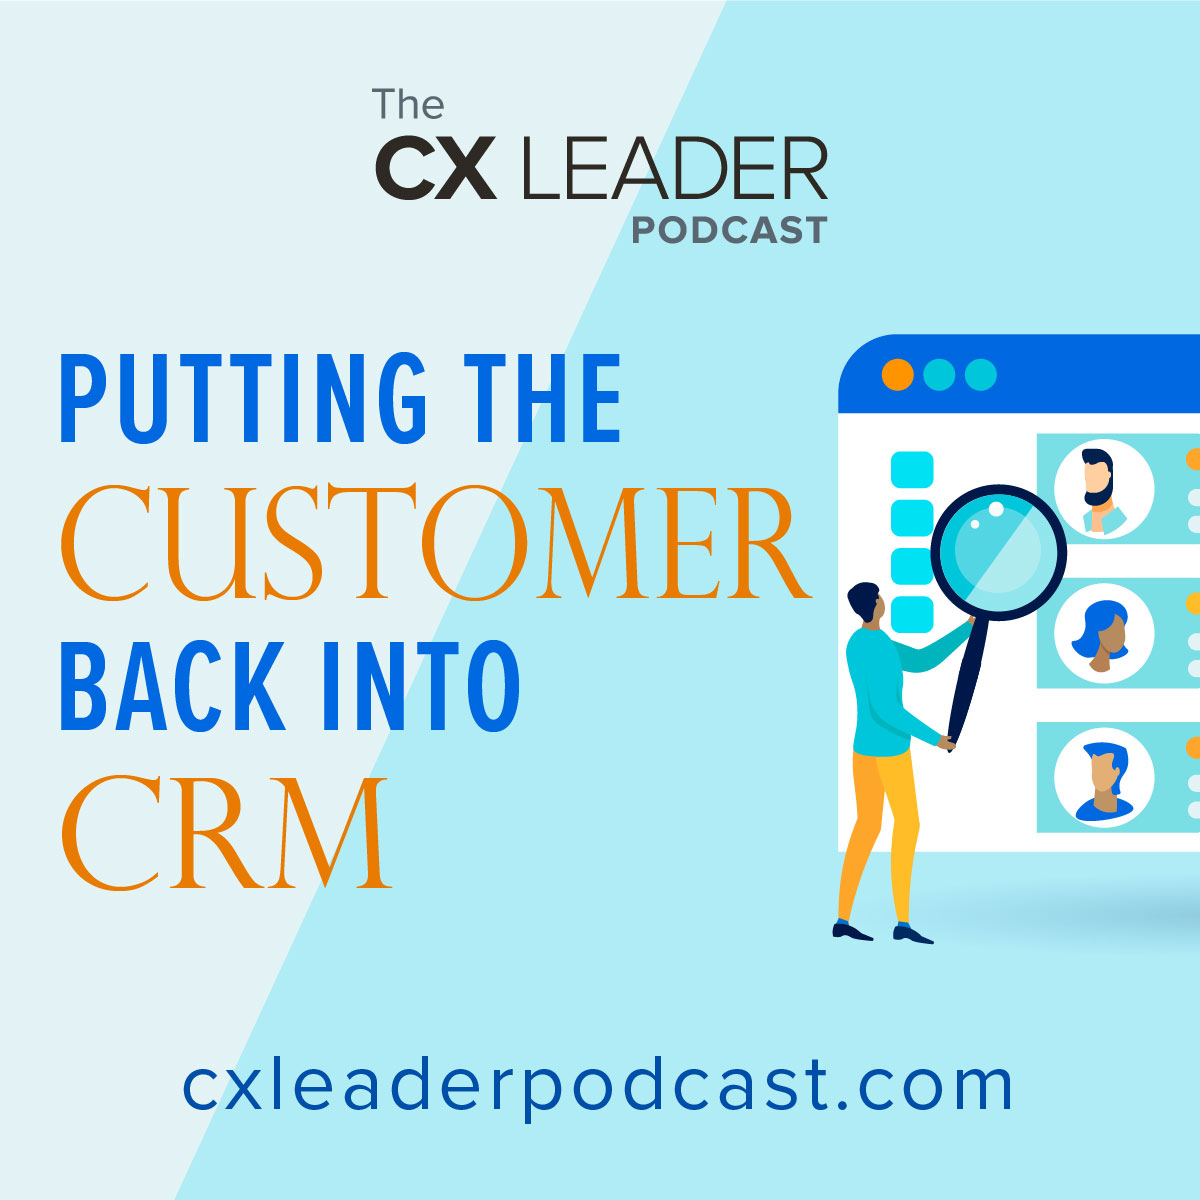 Putting the Customer back into CRM